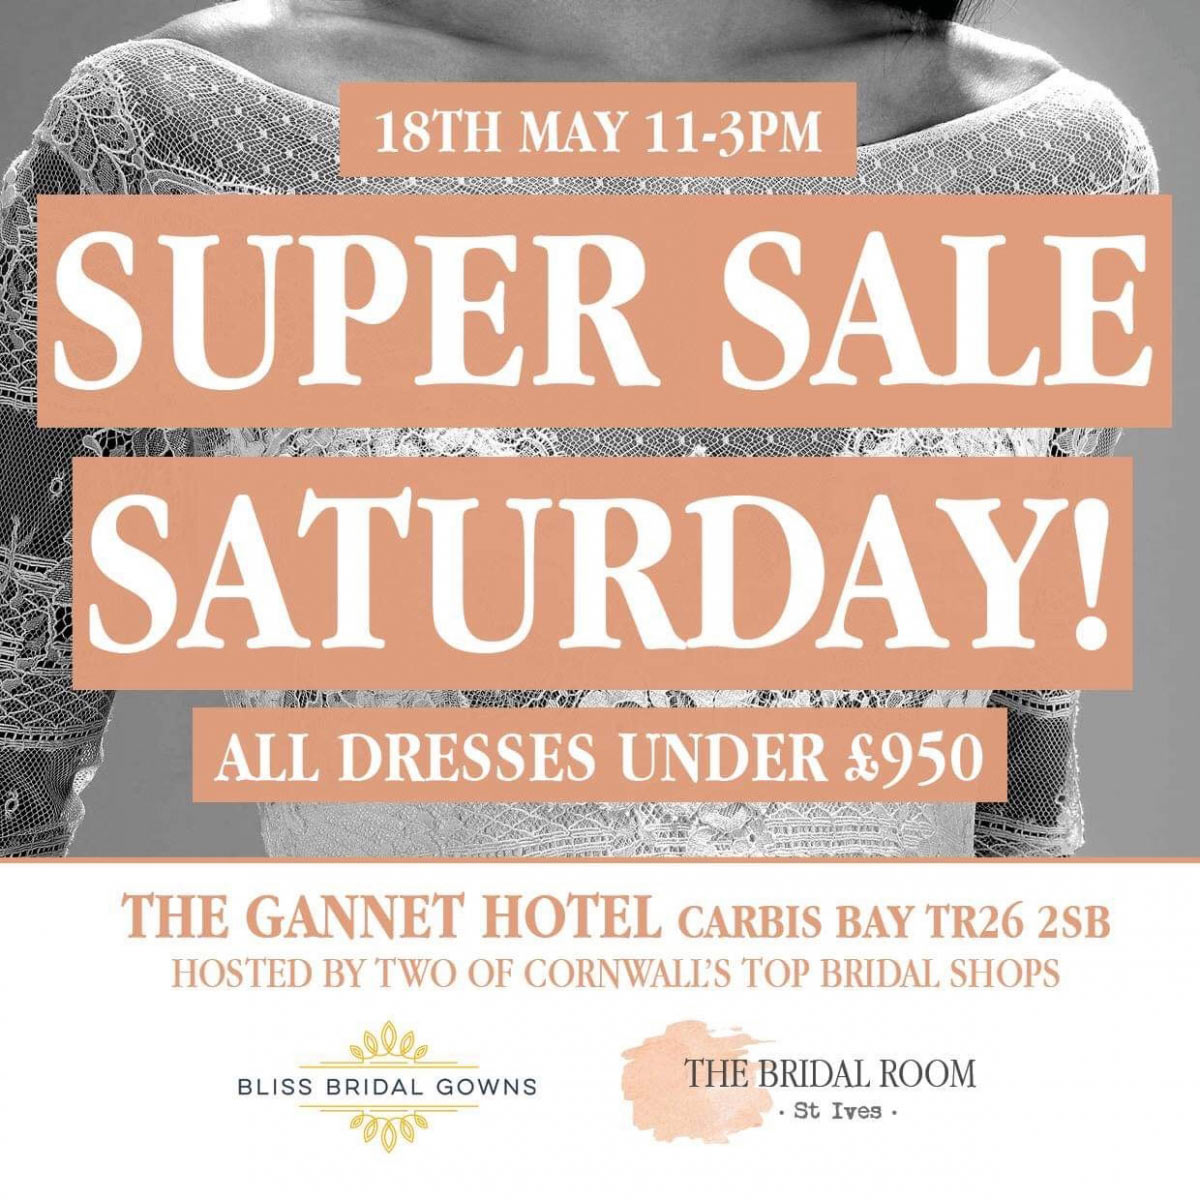 Super sale Saturday with The Bridal Room St Ives